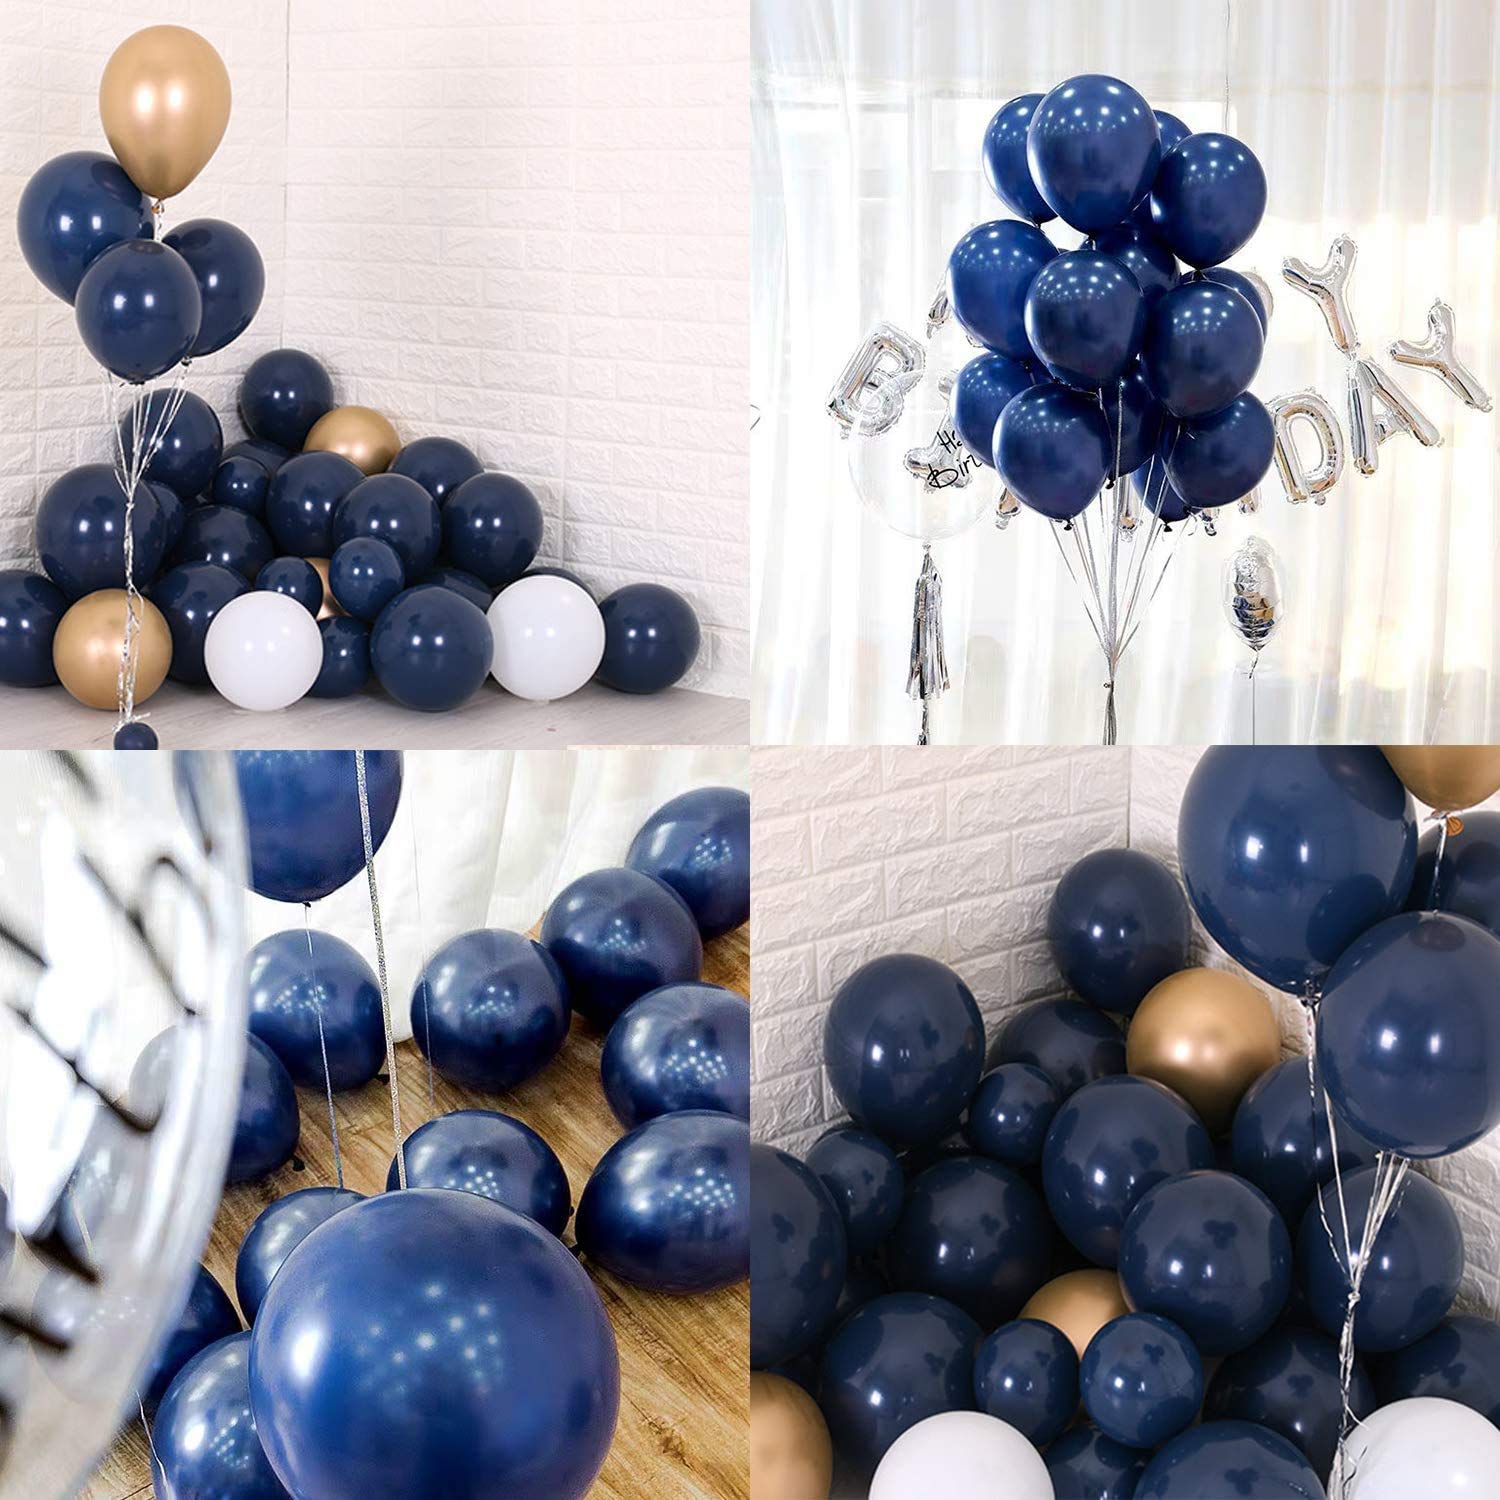 100 Pack Navy Blue Balloons 12 Inch Chrome Round Helium Pearl Dark Blue Balloons for Wedding Birthday Christmas Party Decoration (Navy Blue)